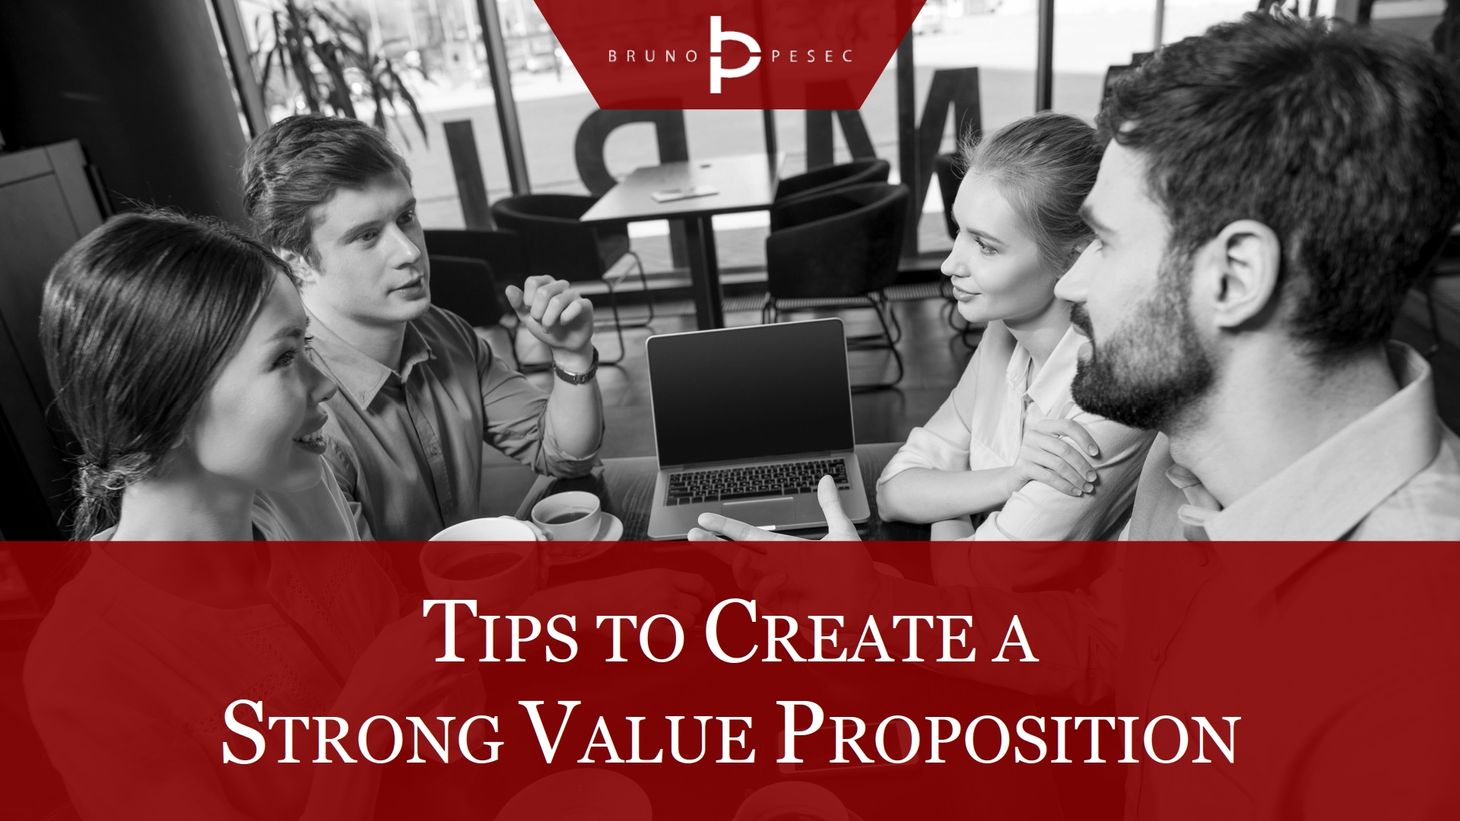 Tips to create a strong value proposition